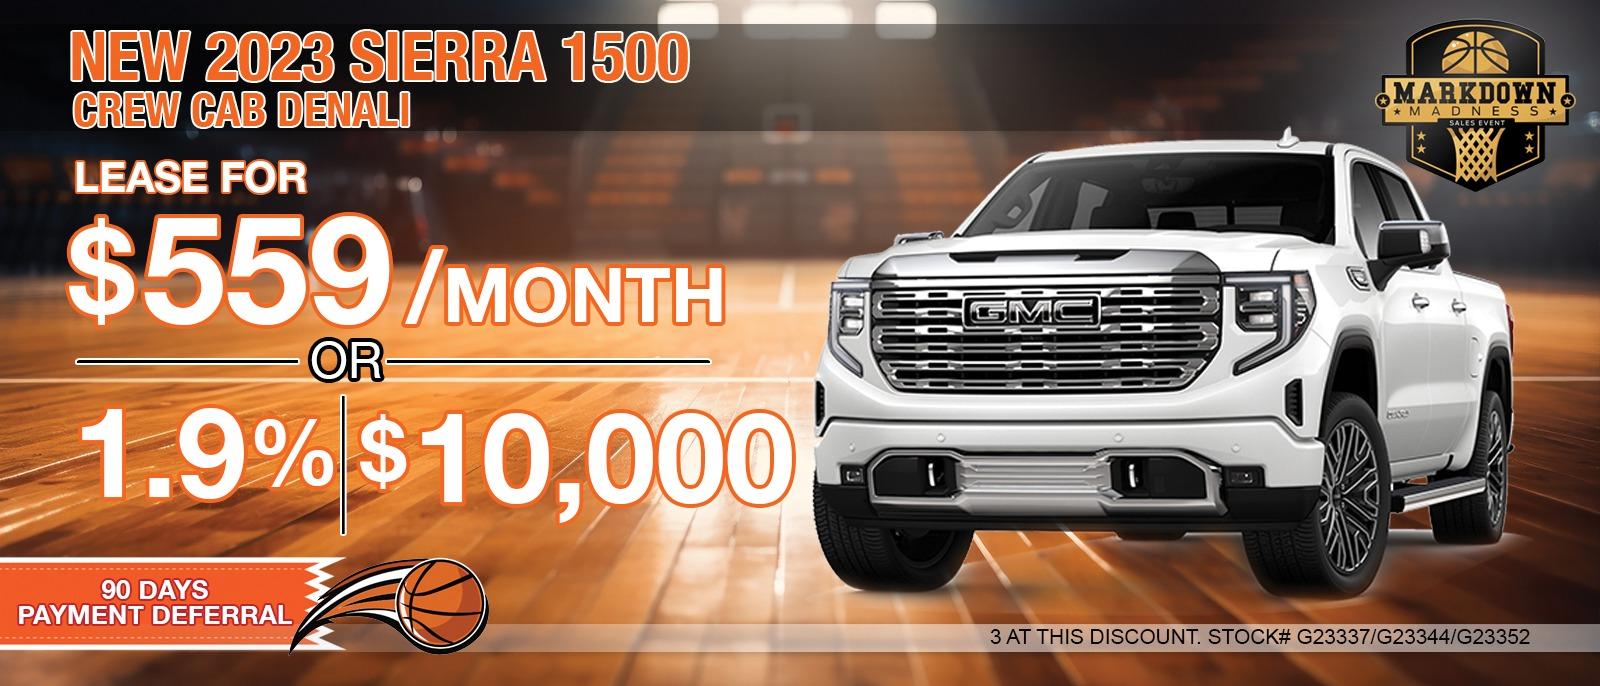 2023 GMC SIERRA 1500 Denali. Your Net Savings After All Offers save up to $10,000